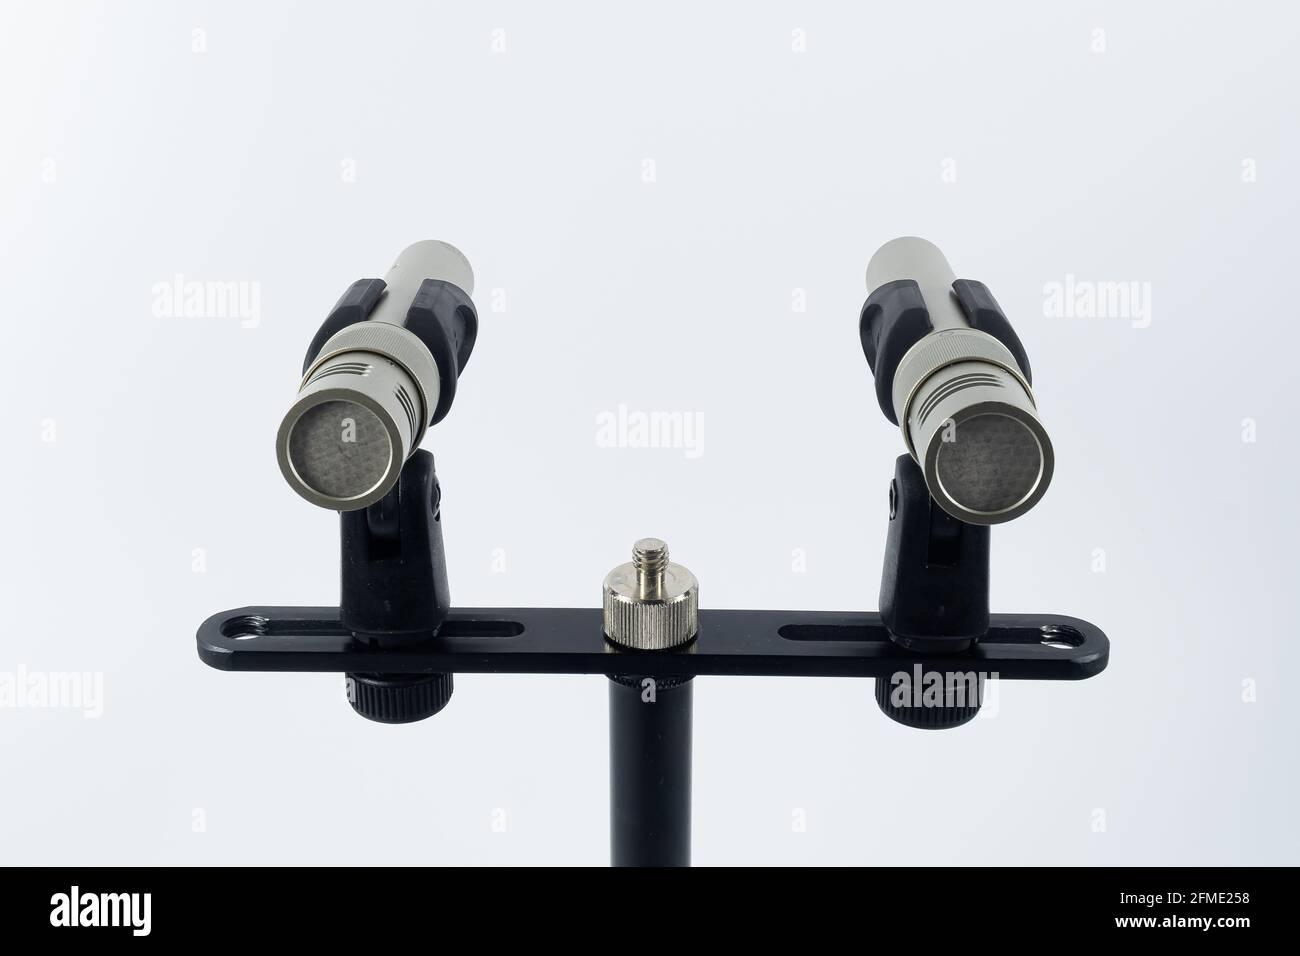 ZURICH, SWITZERLAND - MARCH 18, 2020: A pair of the small diaphragm condenser microphones for studio recording. Stock Photo